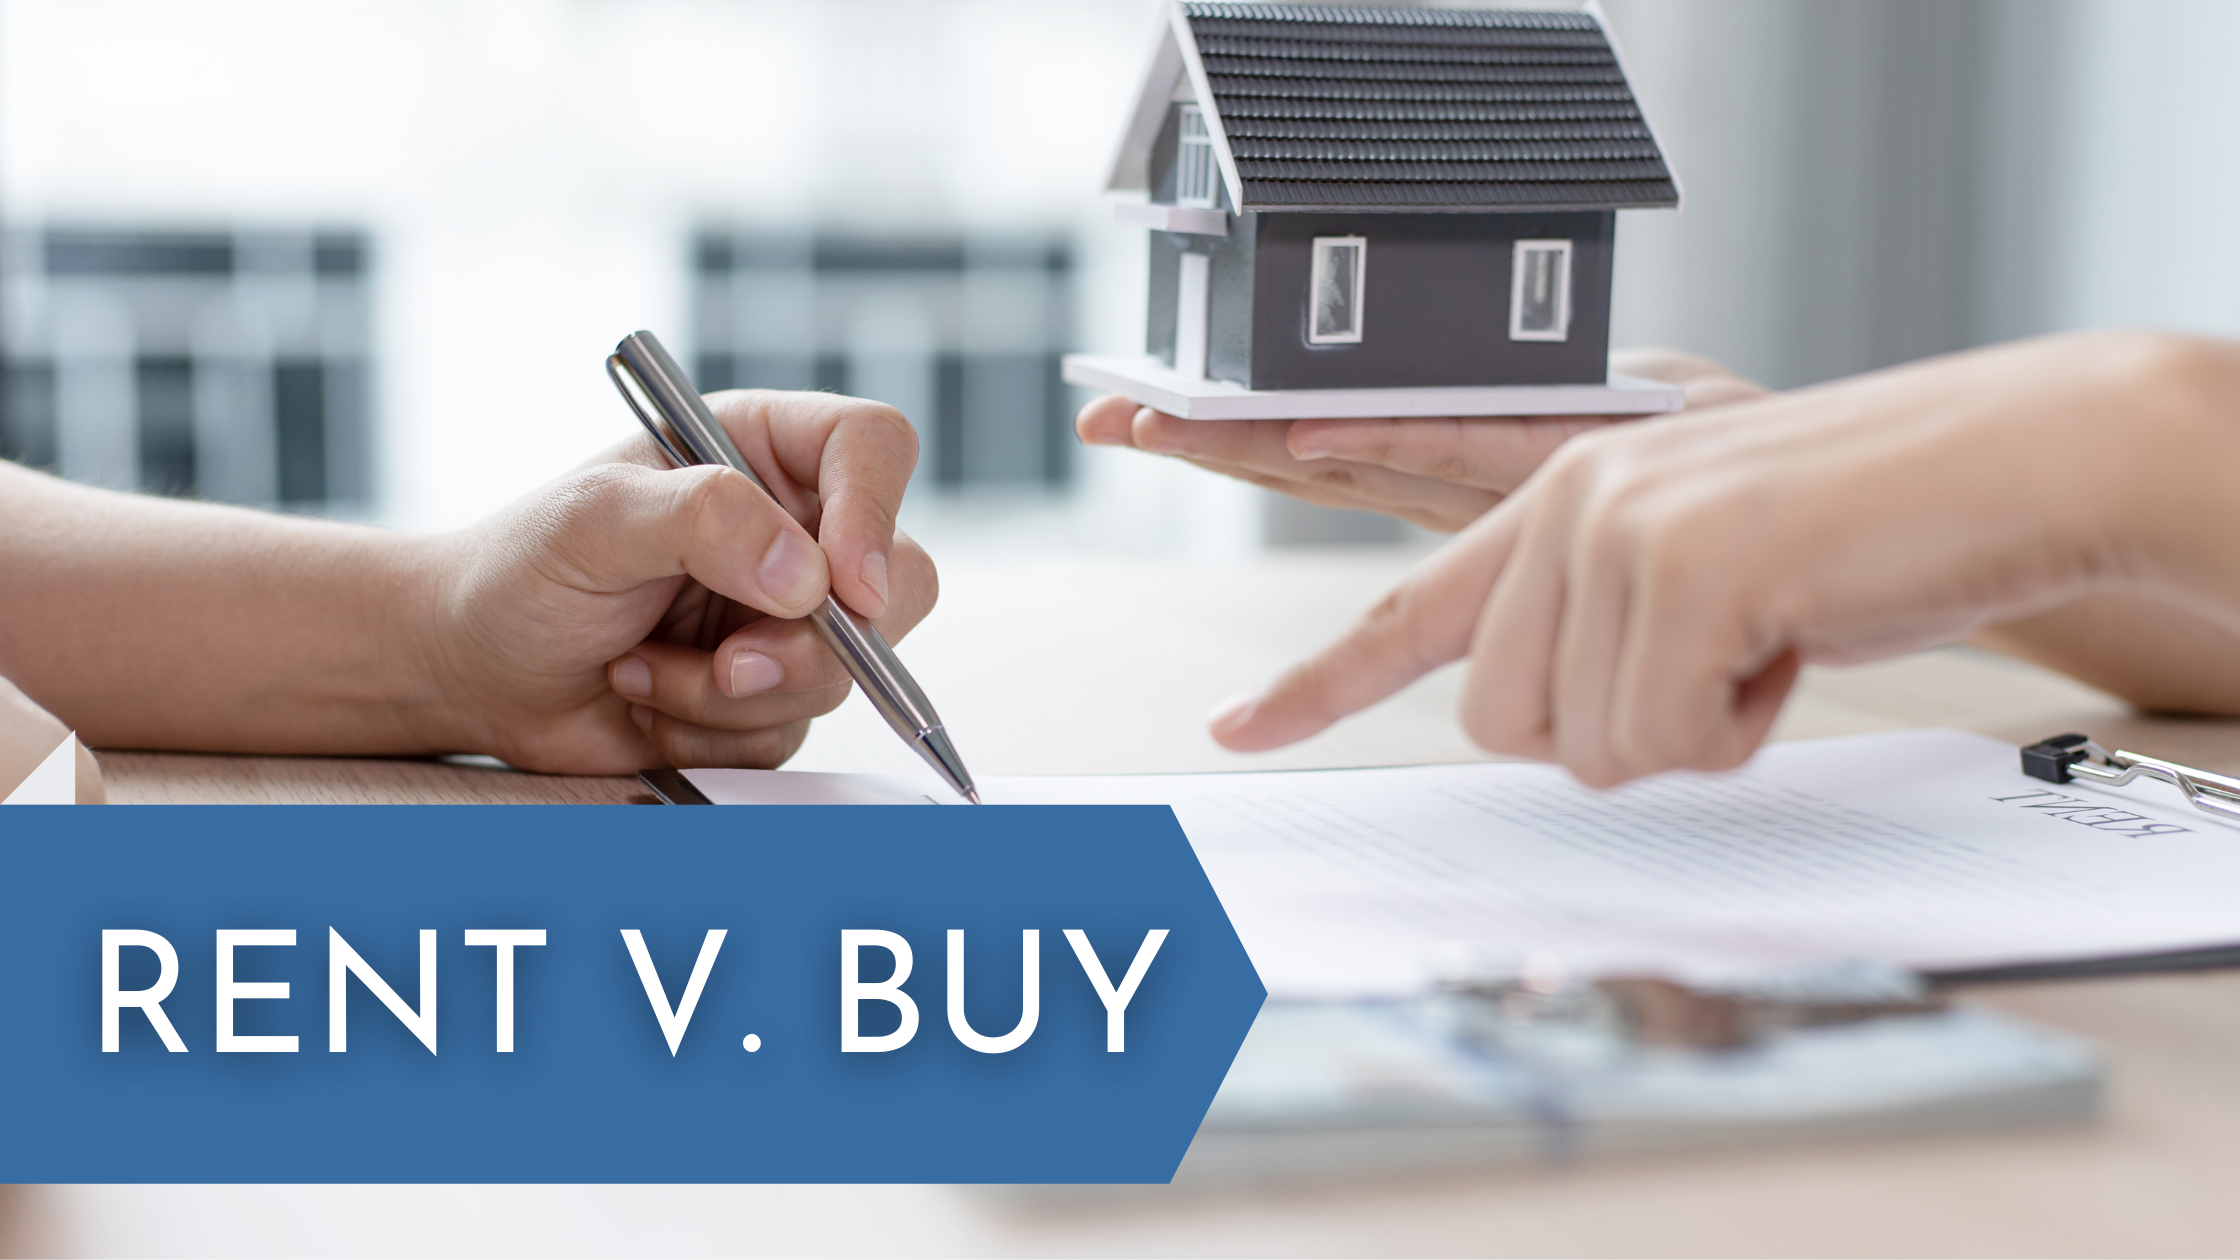 Should I Rent or Purchase a Home?